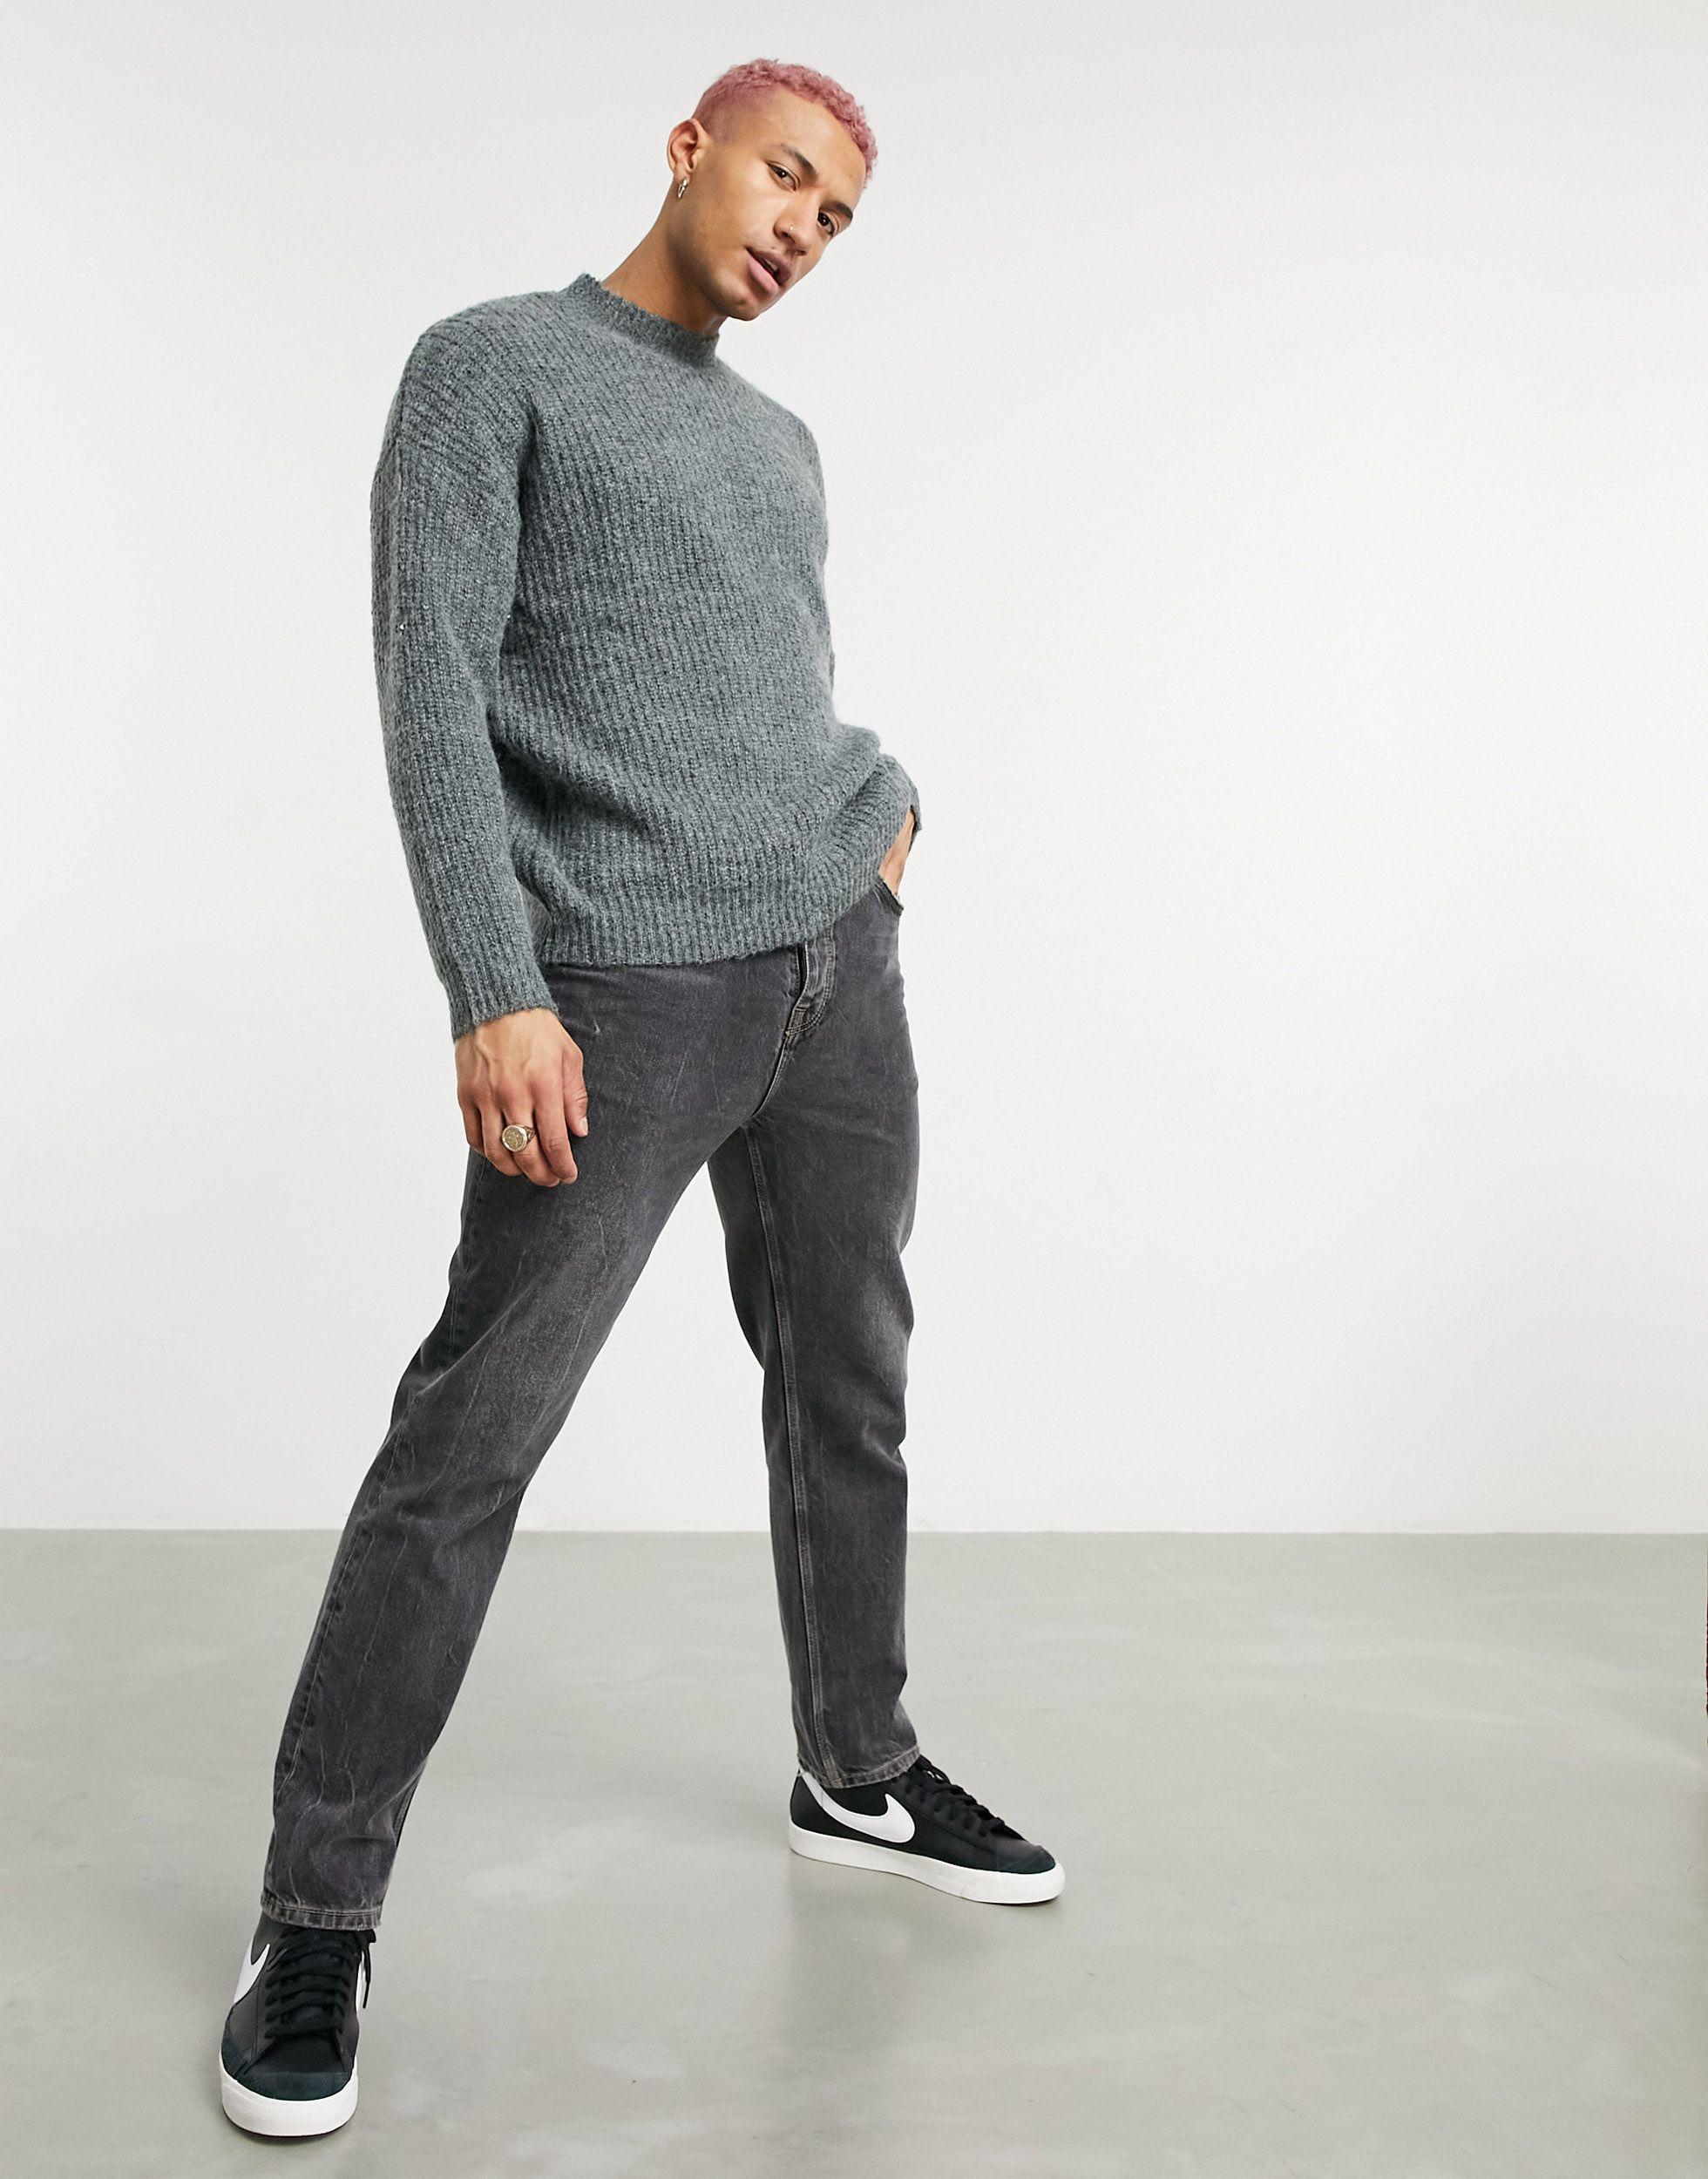 Pull&Bear Ribbed Crew Neck Sweater in Brown for Men - Lyst